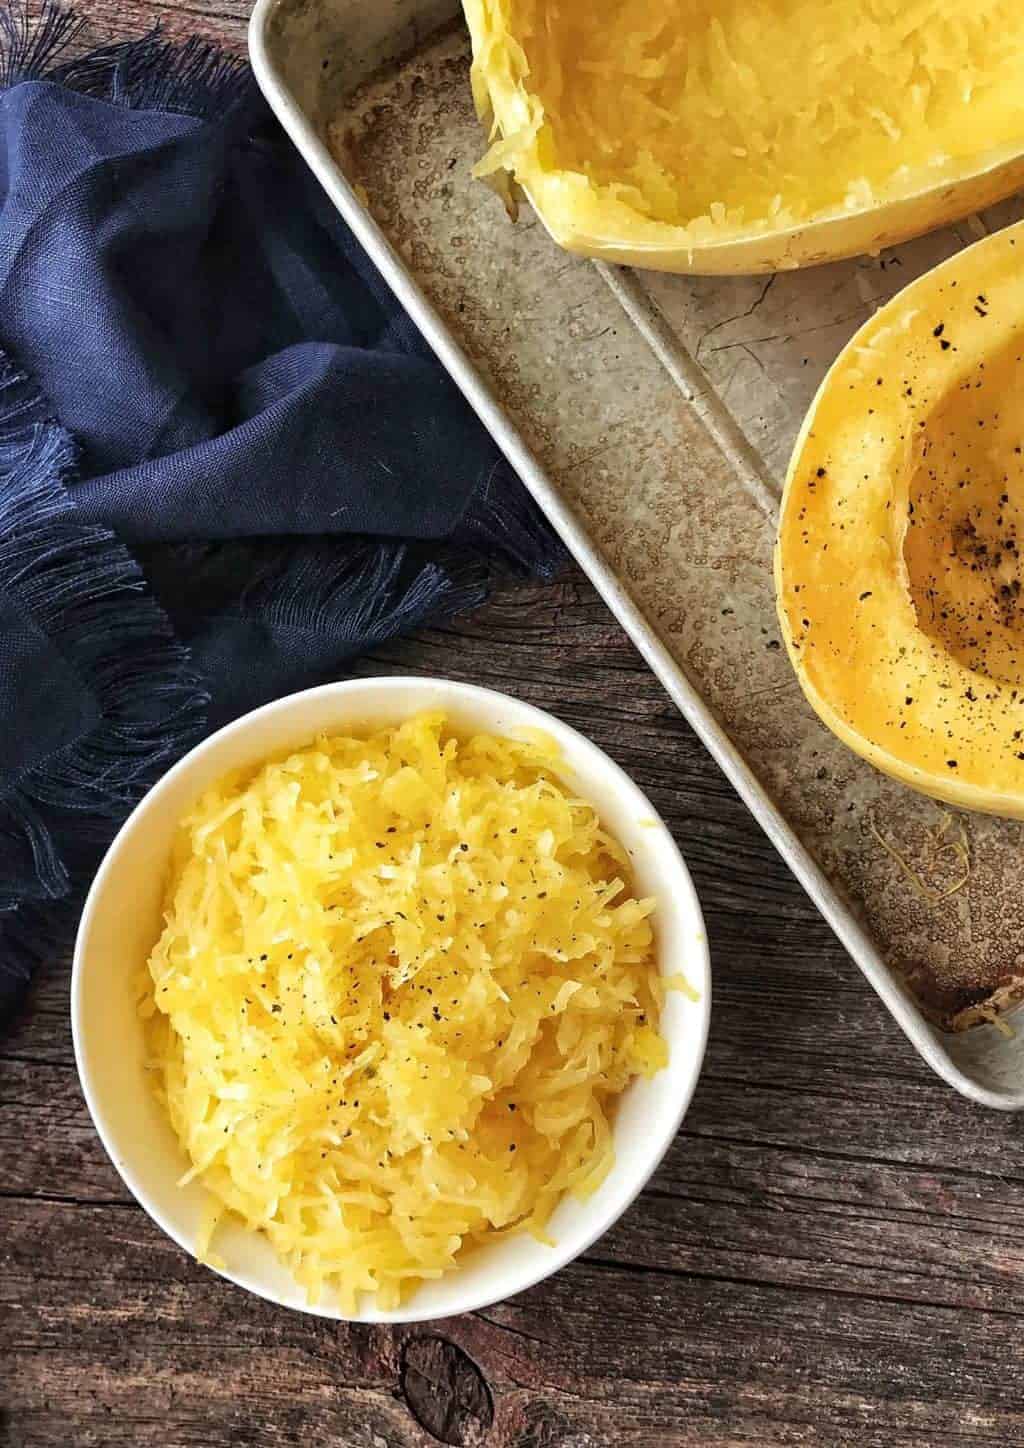 Spaghetti squash shown in a white bowl after cooking.